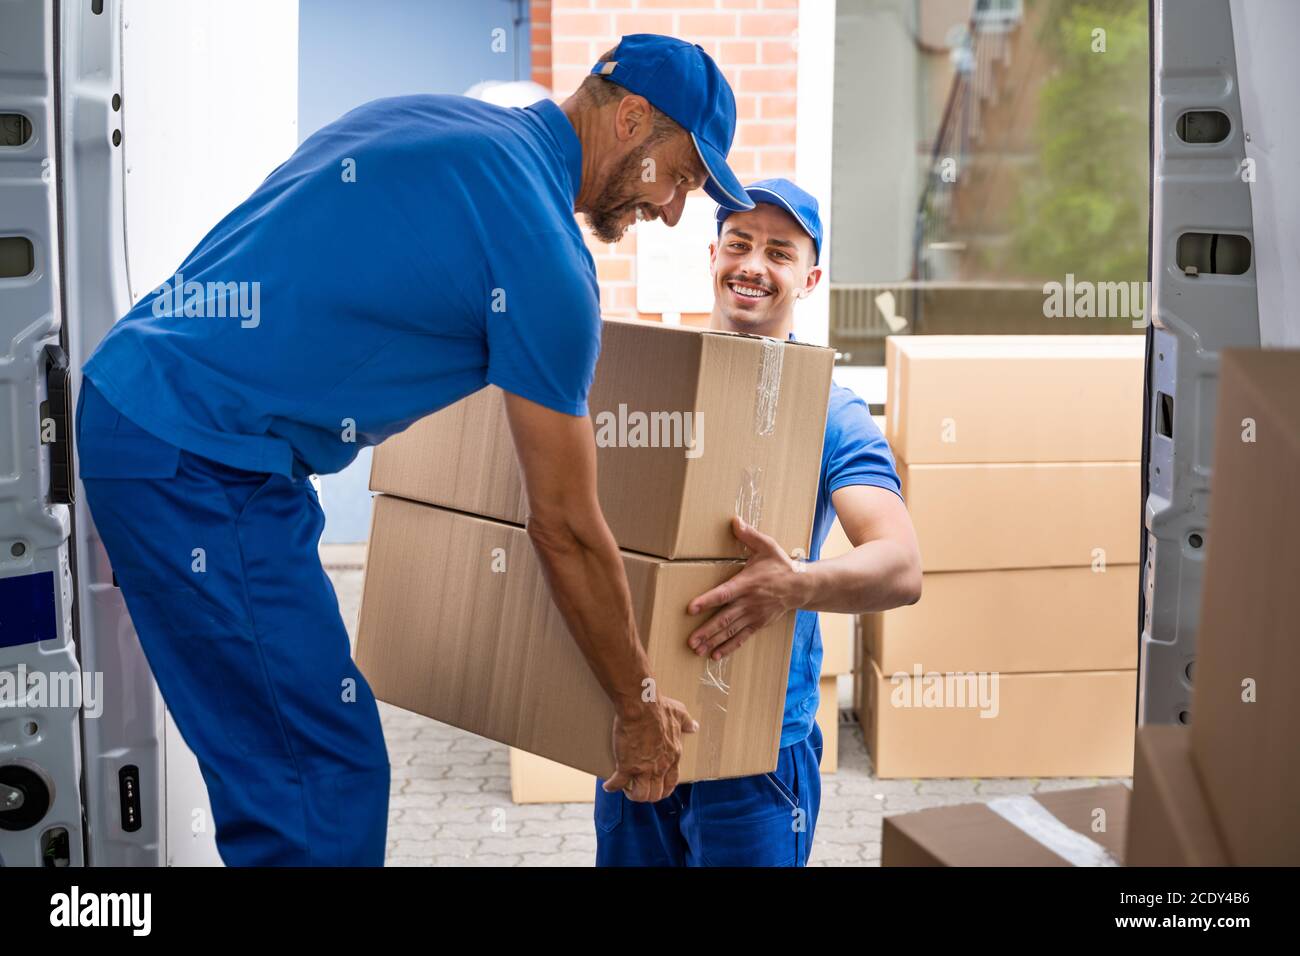 Moving House Truck Or Van Load. Removal And Delivery Stock Photo